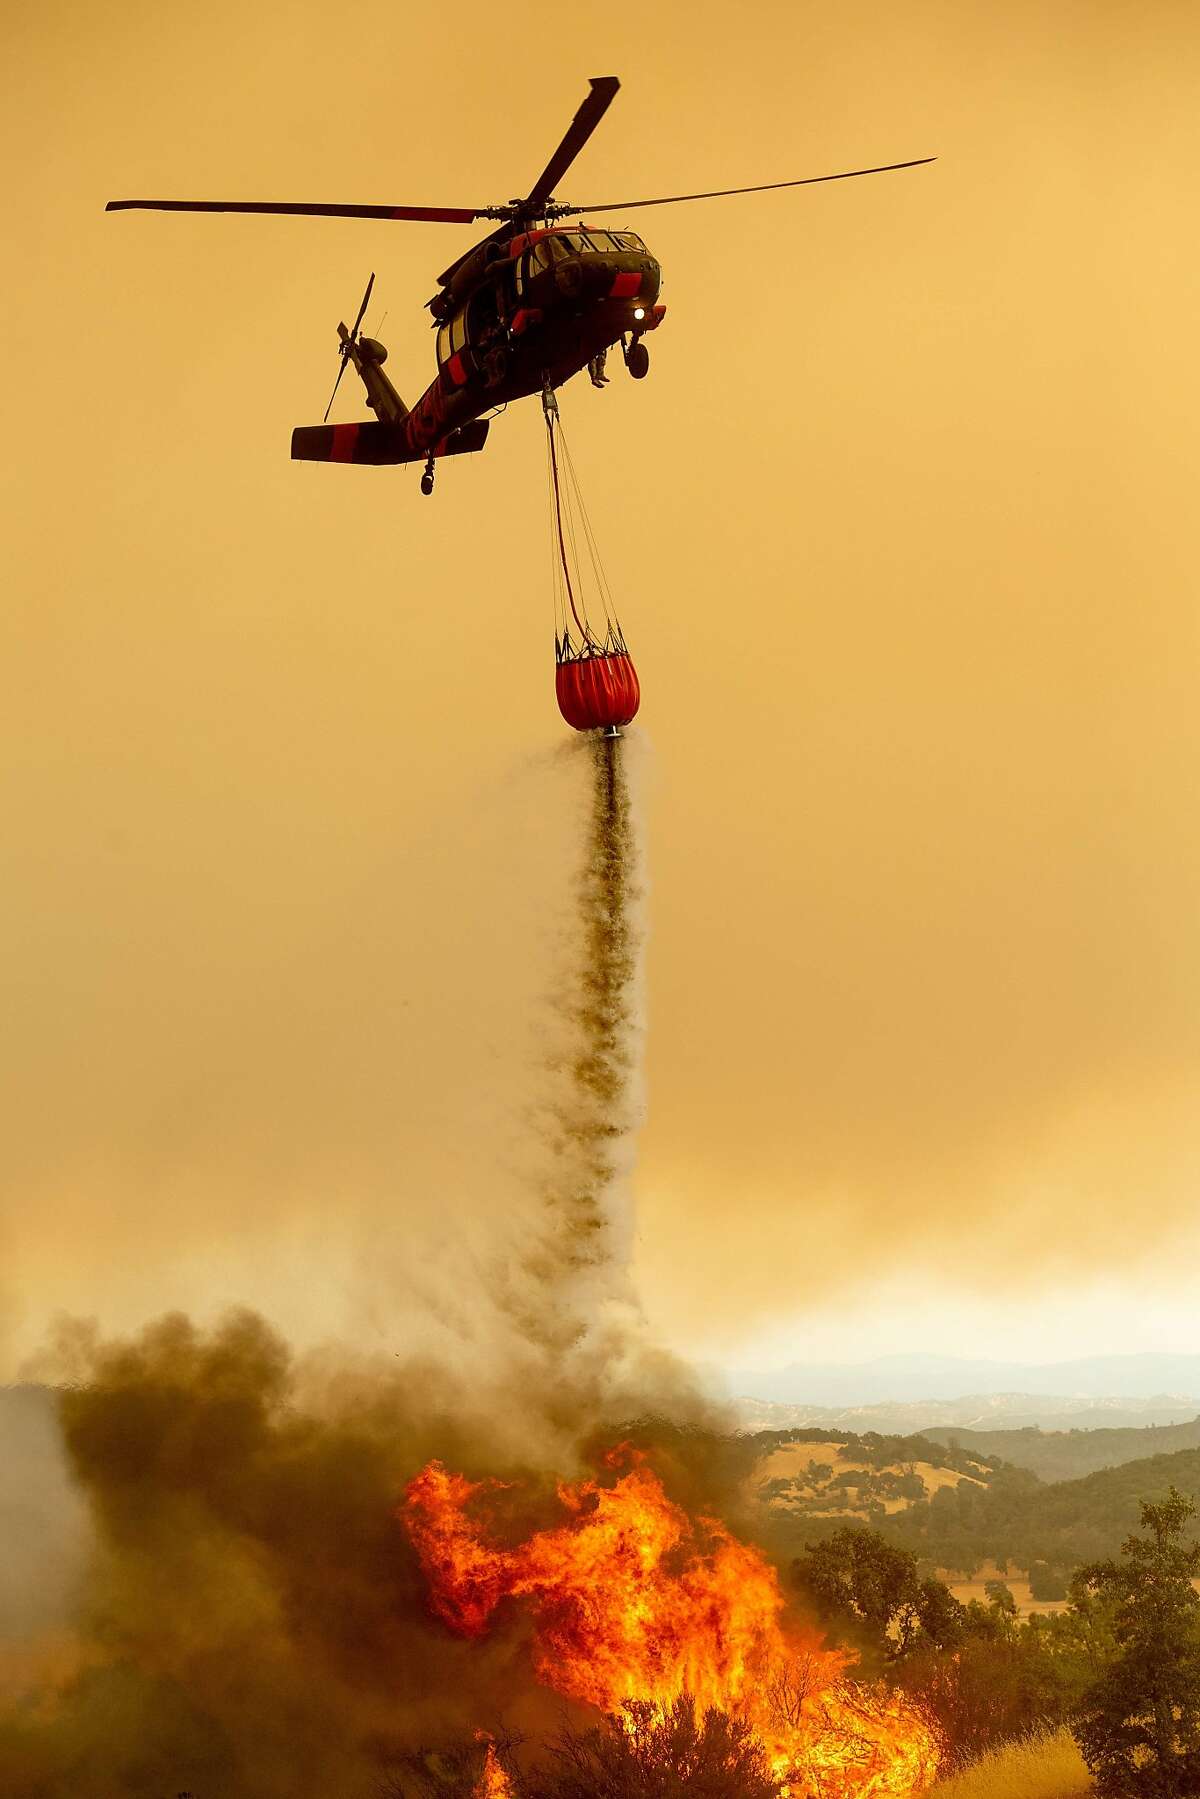 A helicopter drops water on the Ranch Fire, part of the Mendocino Complex Fire, burning on High Valley Rd. near Clearlake Oaks, California, on Sunday, Aug. 5, 2018. / AFP PHOTO / NOAH BERGERNOAH BERGER/AFP/Getty Images